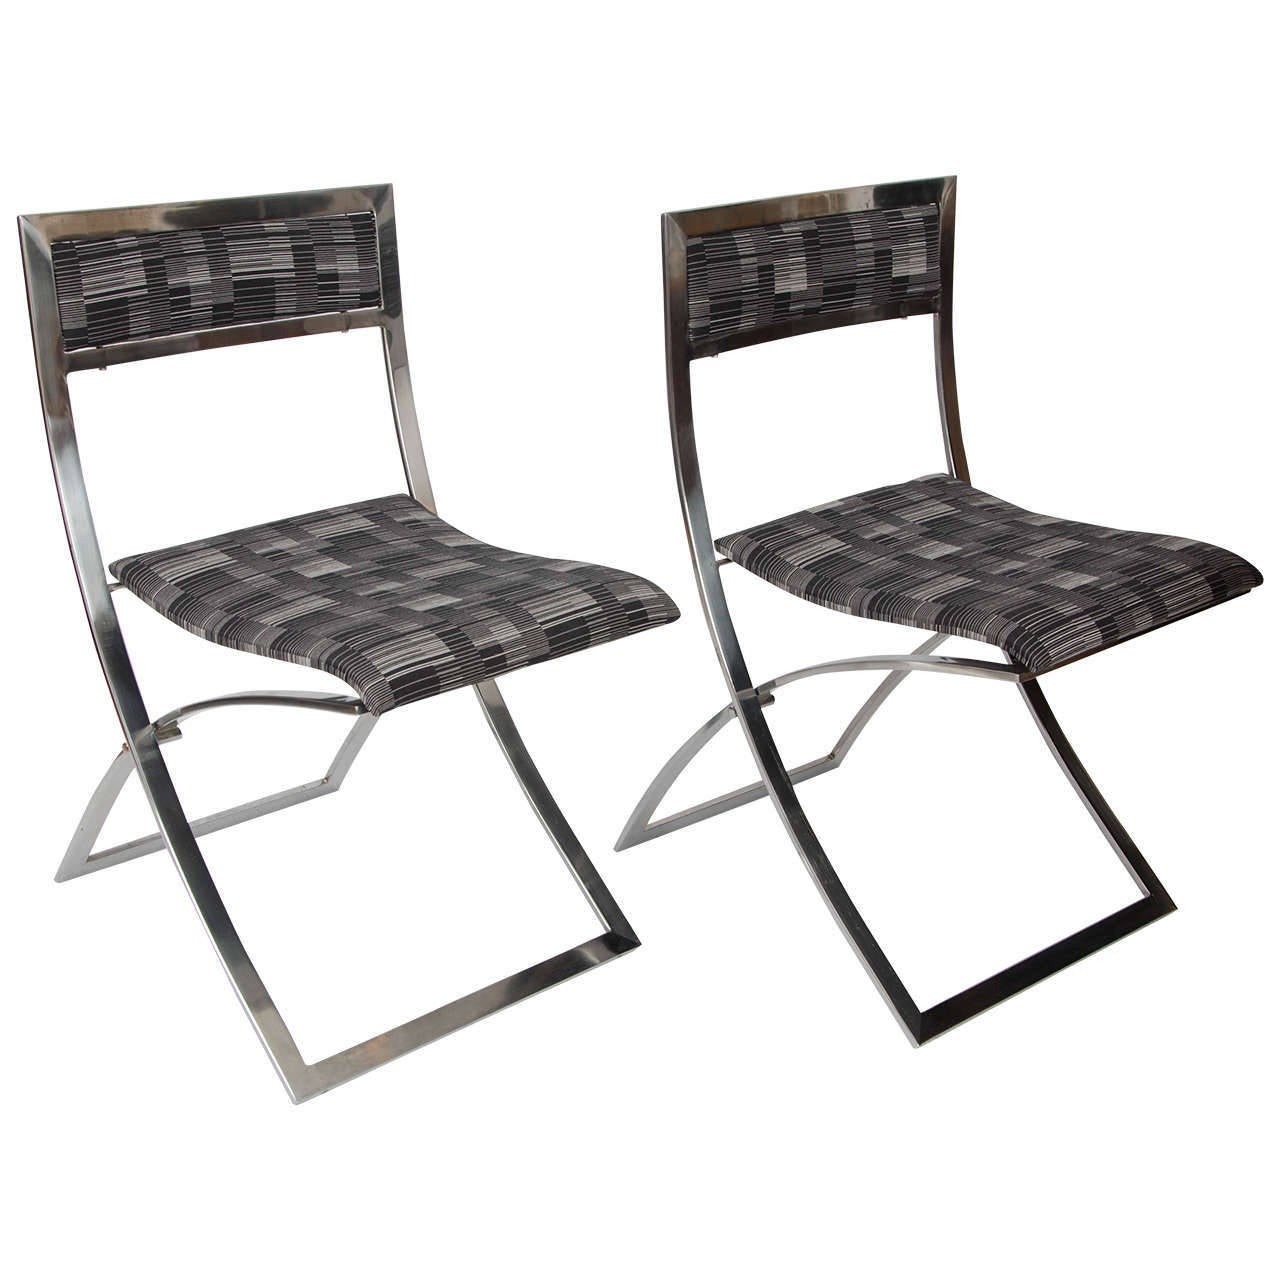 These 'Luisa' minimalist folding dining chairs are designed by the Italian architect Marcello Cuneo, 1970, for 'Mobel'. His designs were functional simple and elegant. 
The square shaped frames of the folding chairs are made from solid high quality